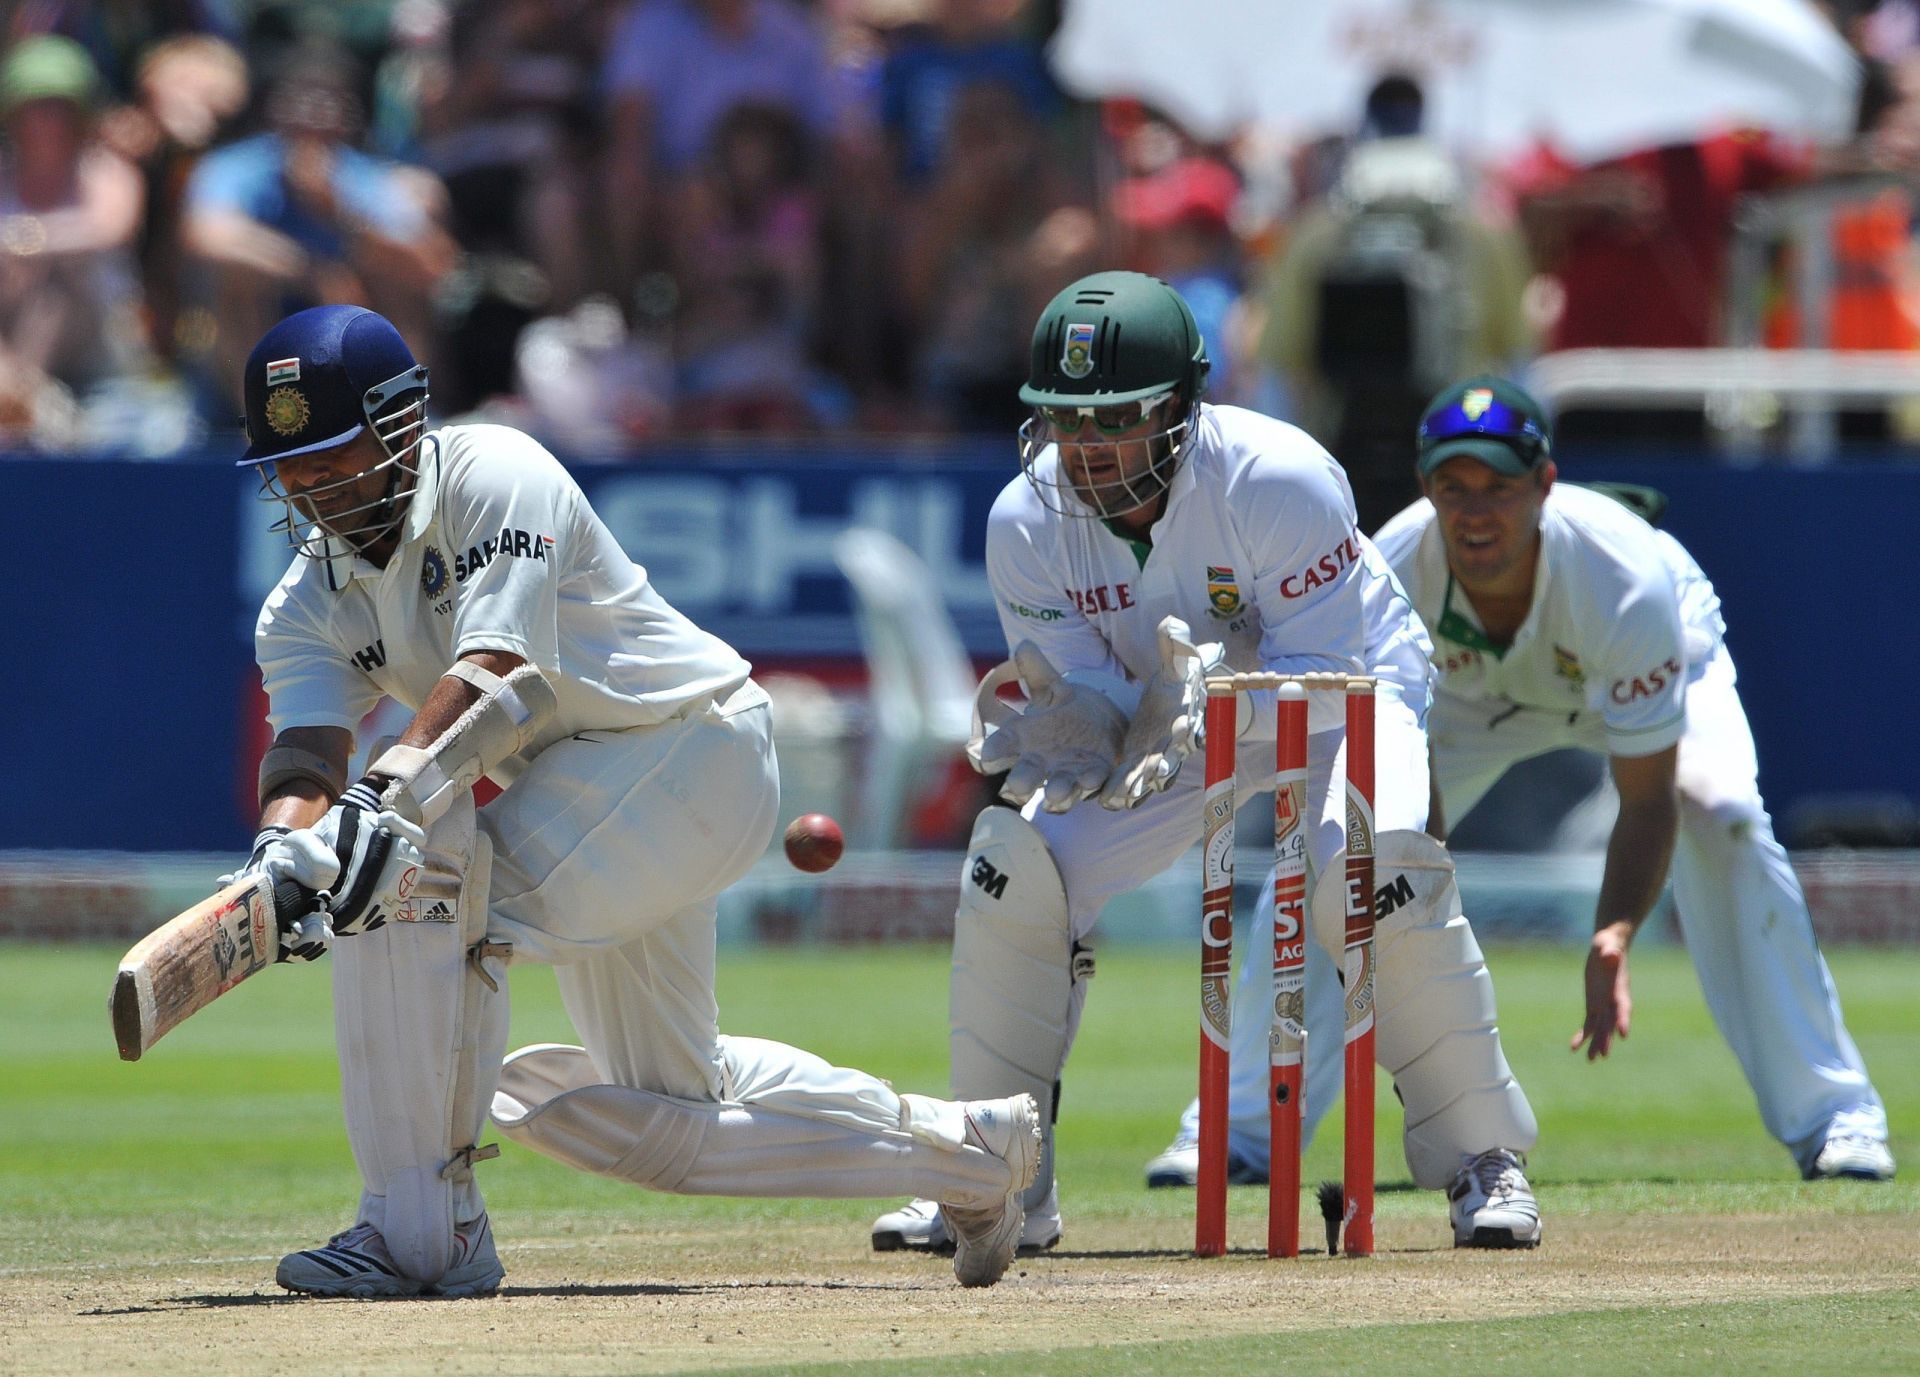 Sachin Tendulkar batting during a Test match in South Africa. Pic: Getty Images